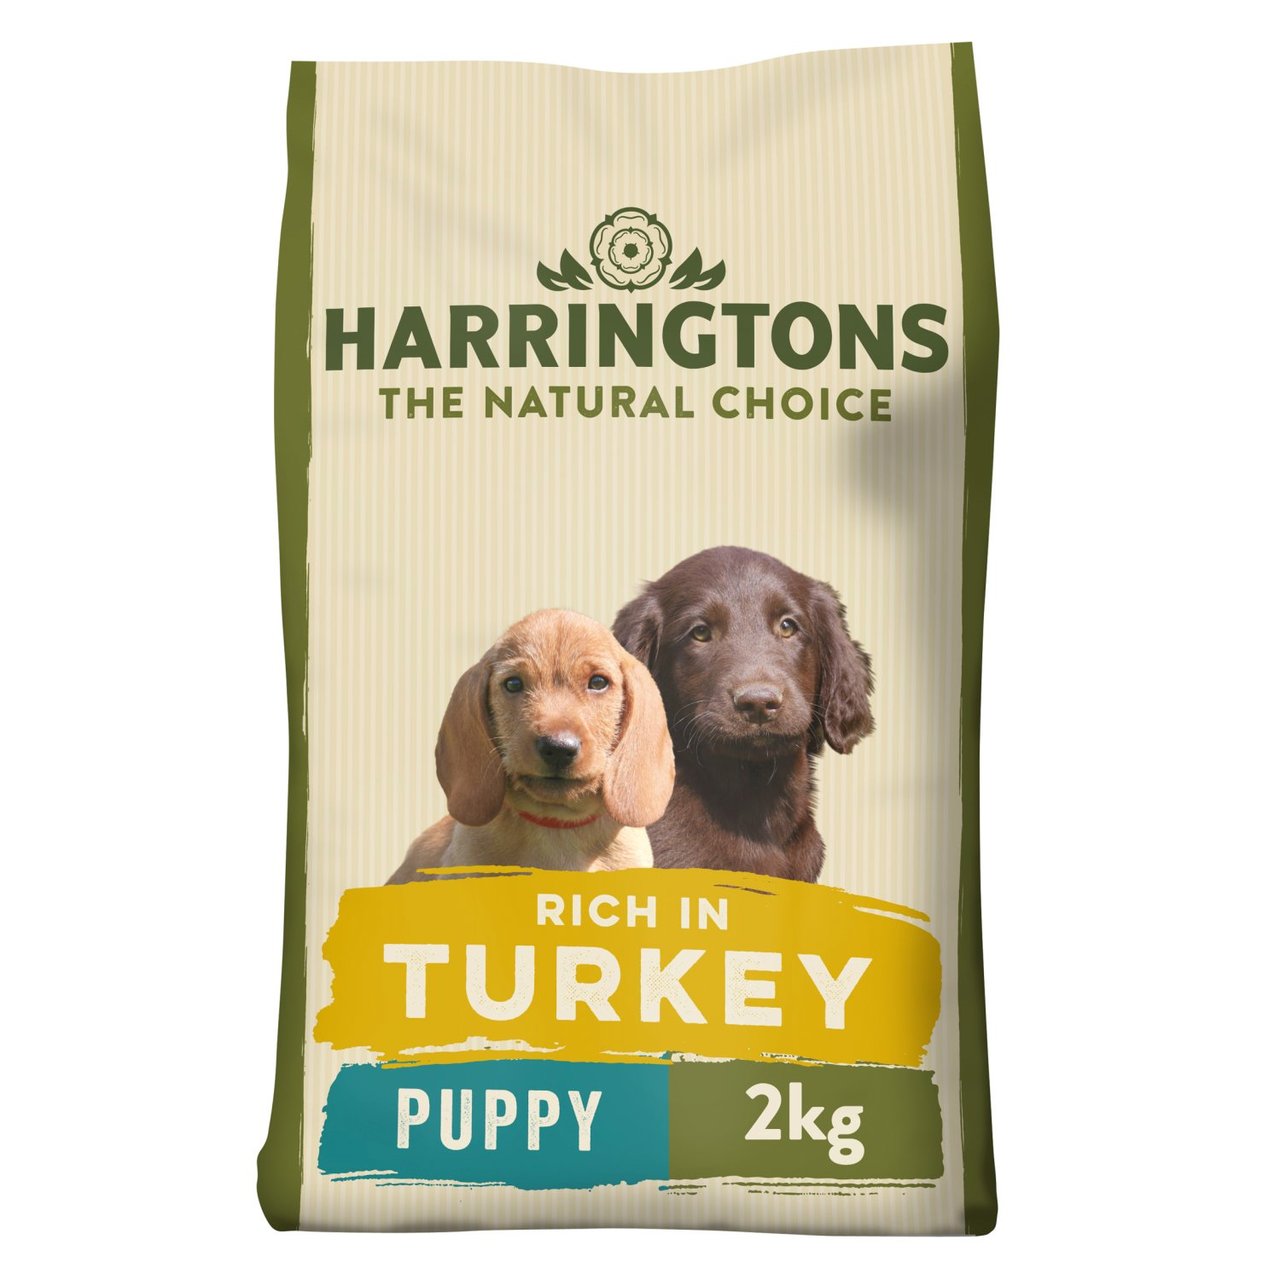 An image of Harringtons Complete Puppy